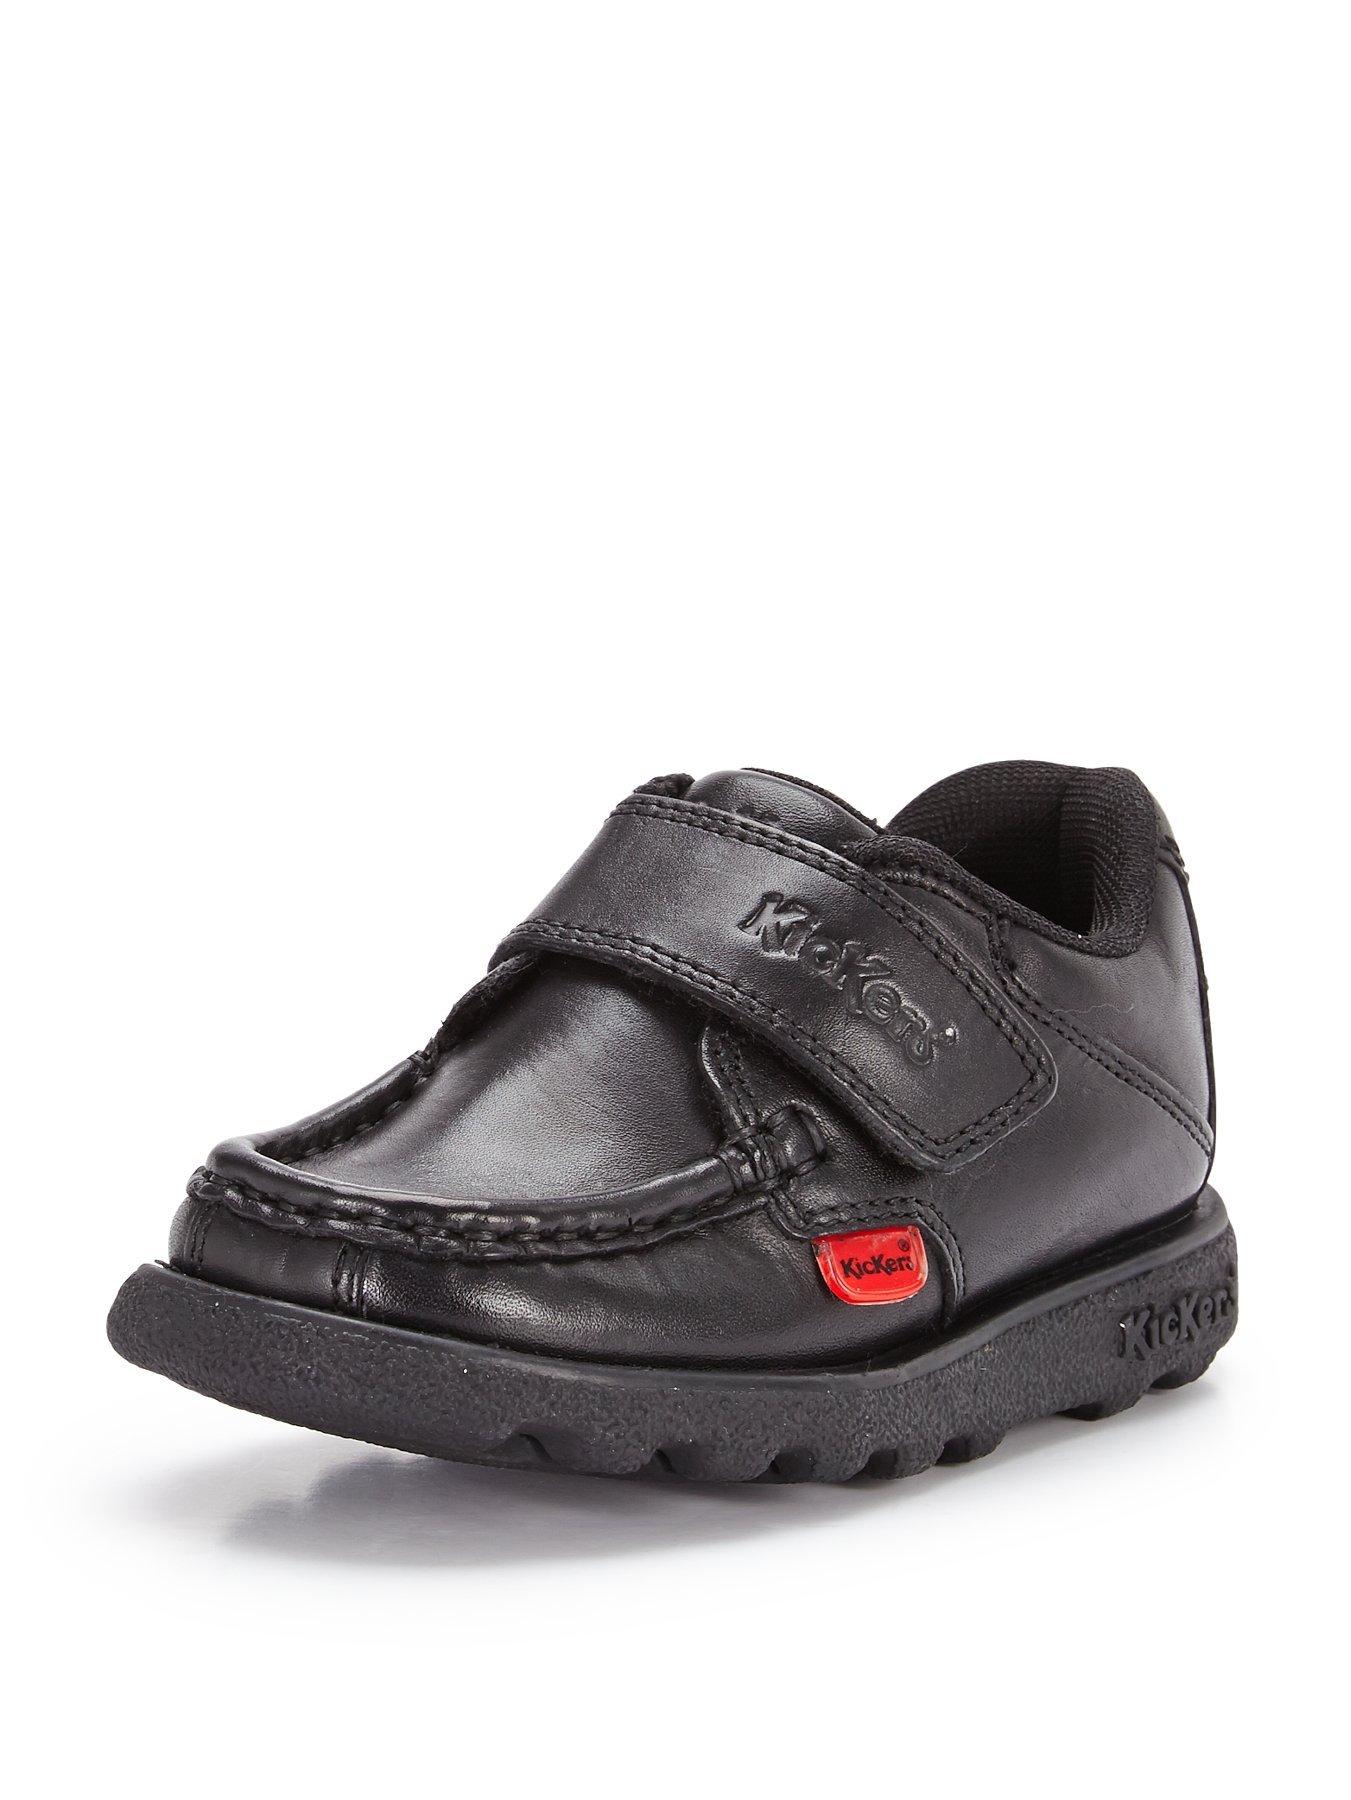 kickers baby boy shoes